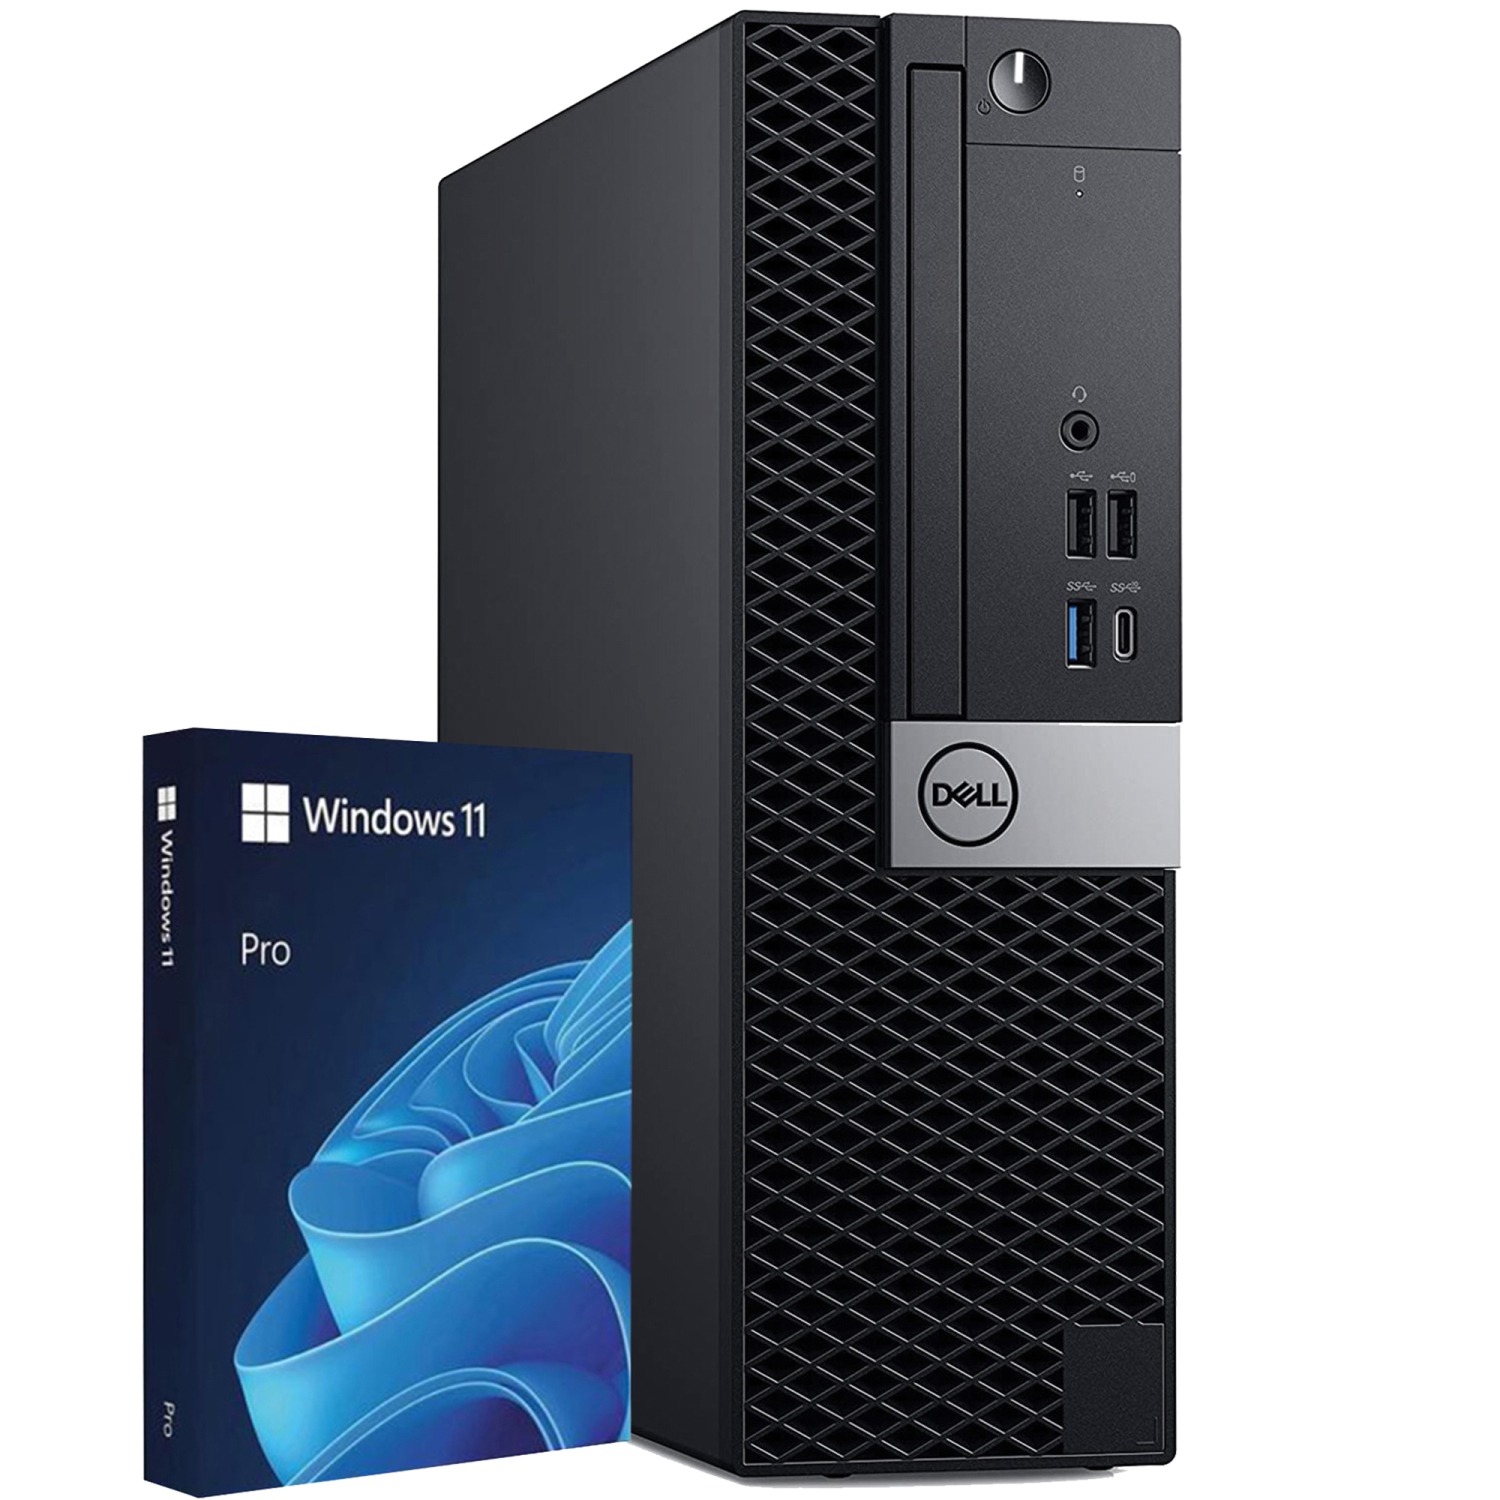 Refurbished (Good) - Dell Computers SFF Desktop Computer PC, Intel Core i5 8th Gen, 16GB RAM, 256GB M.2 NVMe SSD, Windows 11 Pro, Wireless Keyboard and Mouse WiFi Bluetooth Adapter